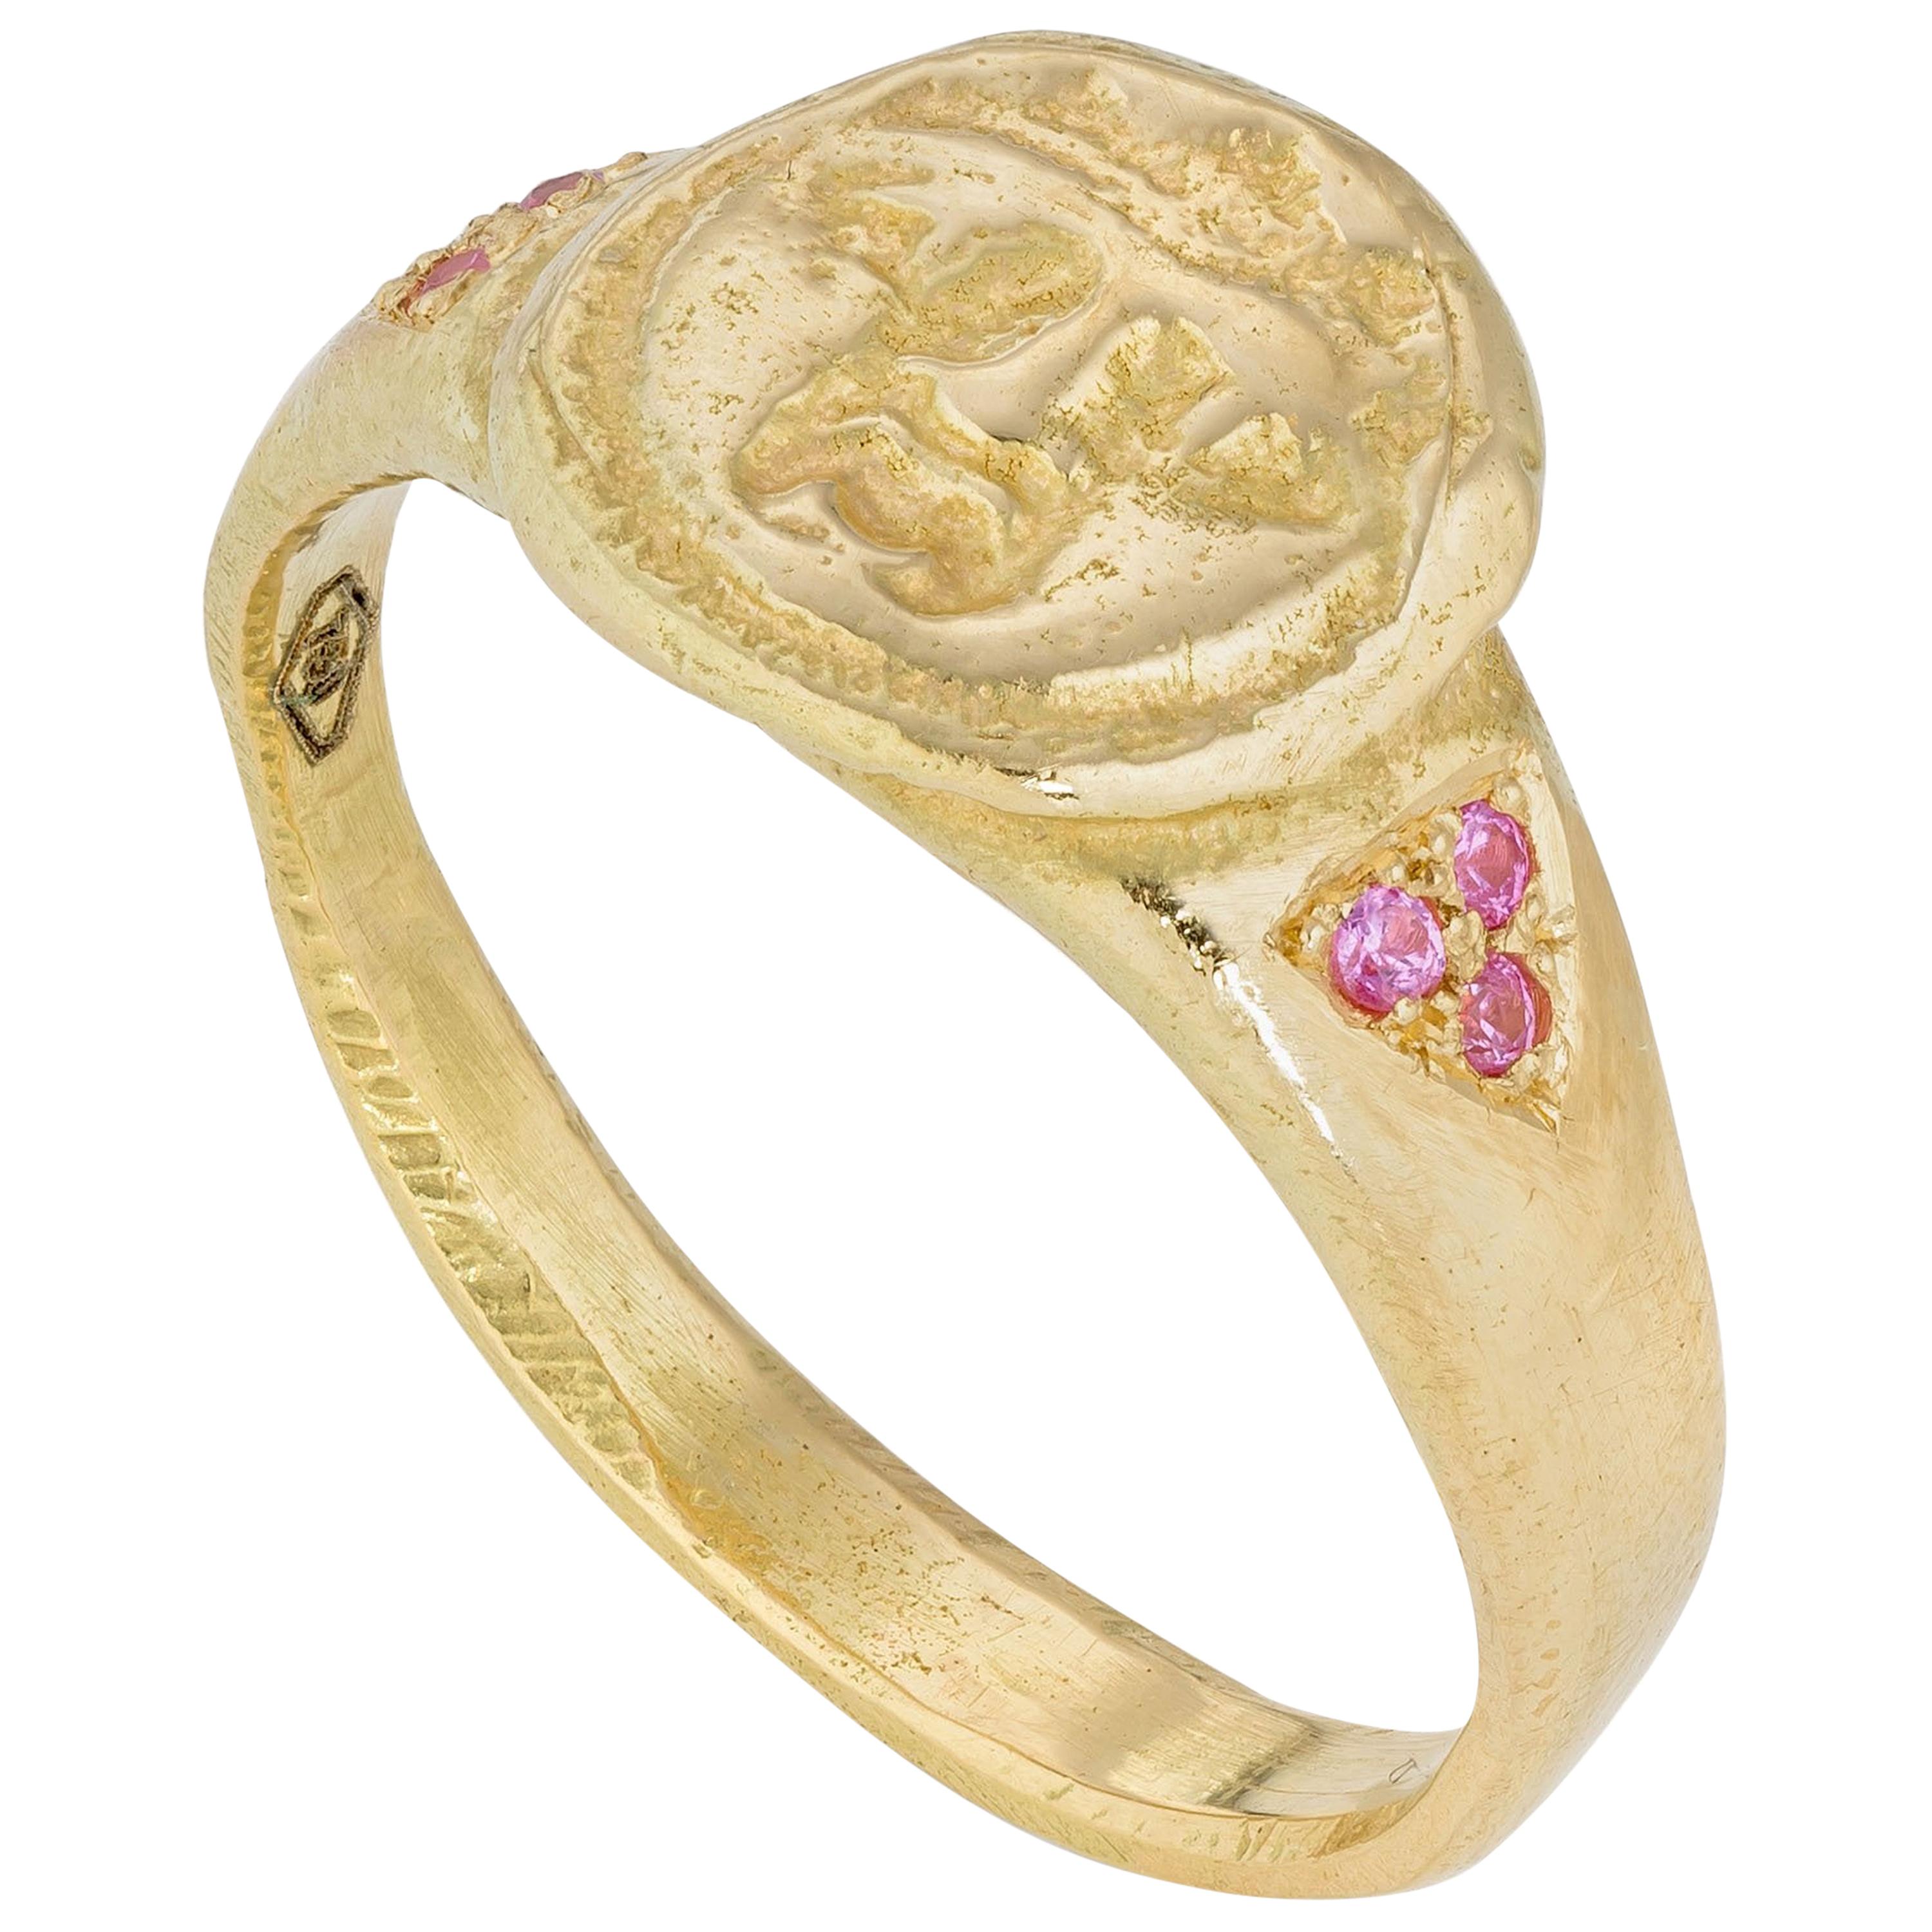 Gorgoneion Pinky Ring, 18 Karat Yellow Gold with Pink Sapphire For Sale